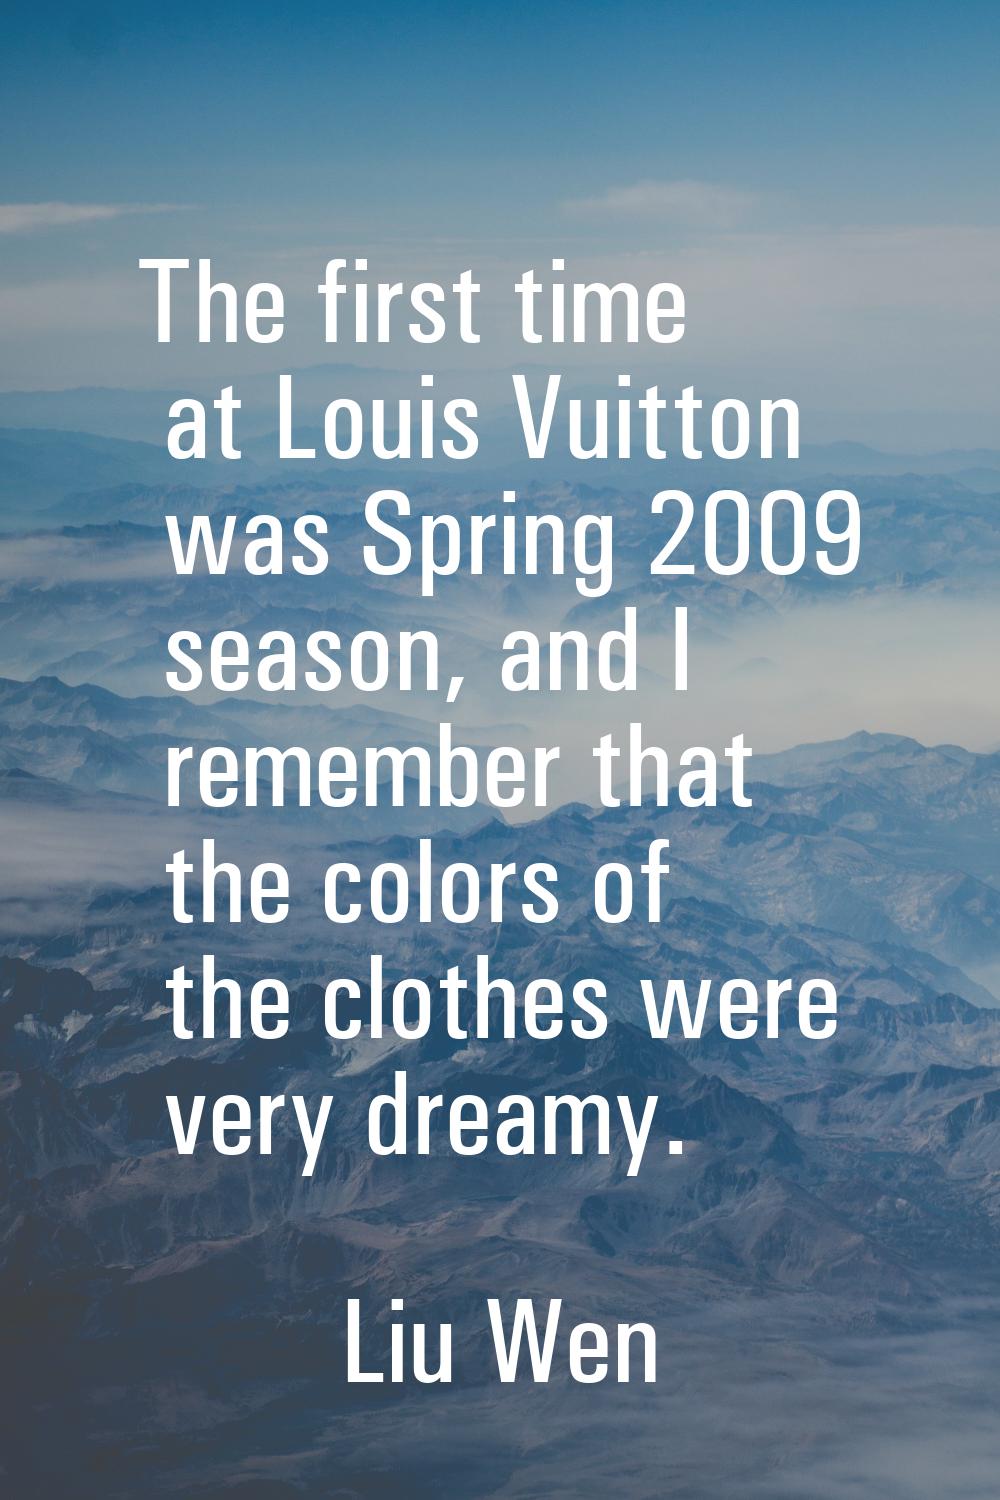 The first time at Louis Vuitton was Spring 2009 season, and I remember that the colors of the cloth